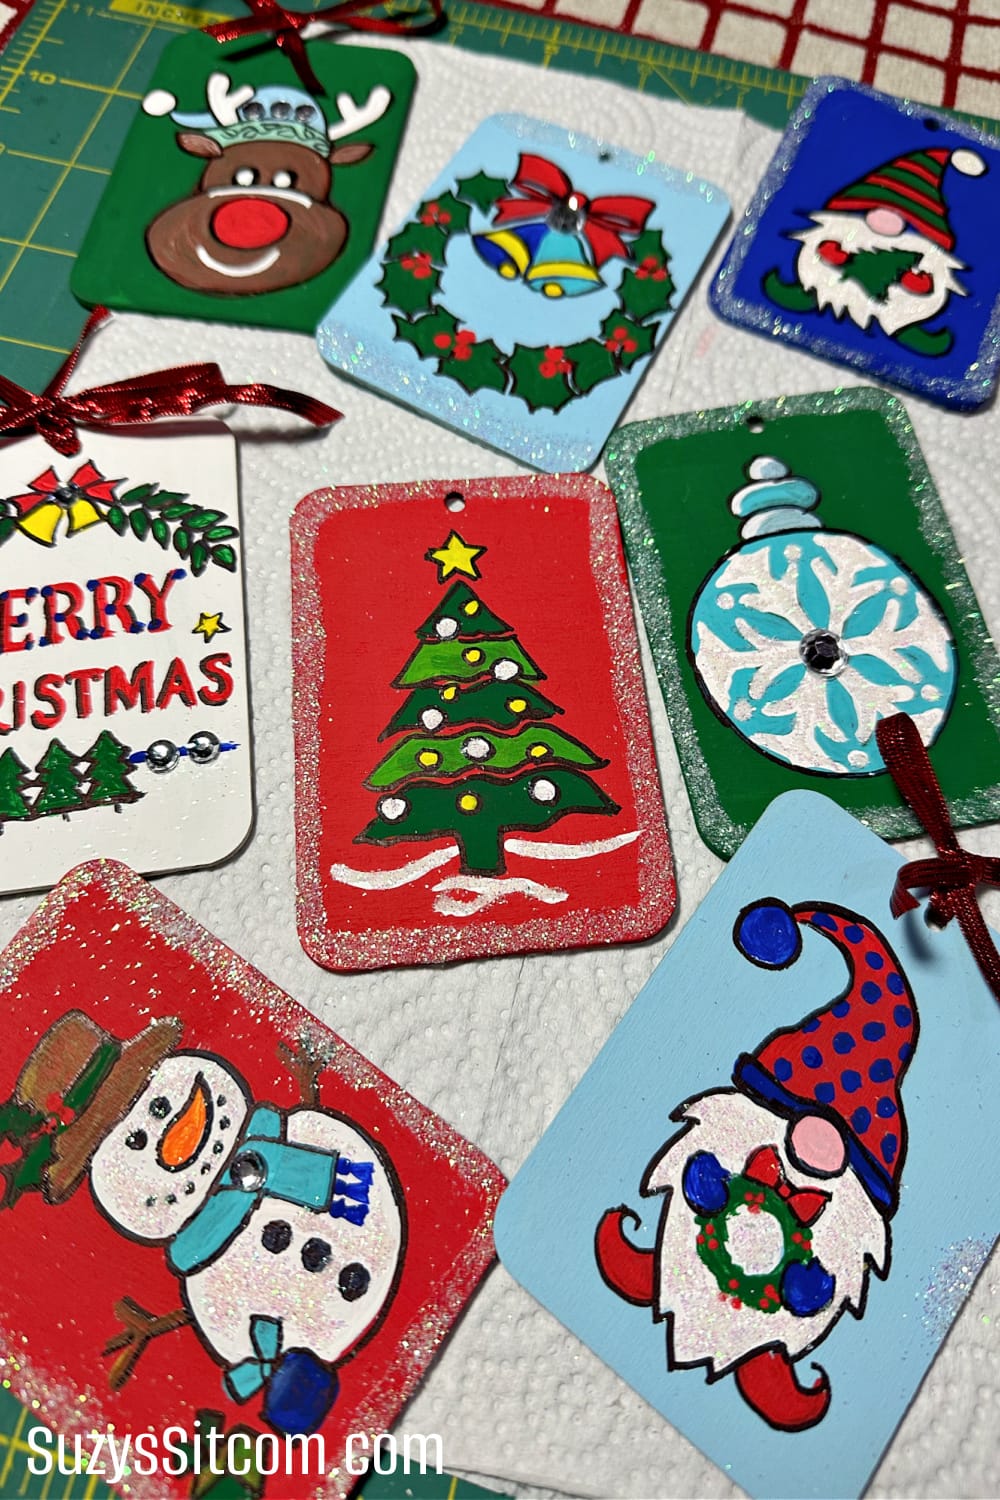 Handpainted wooden gift tags